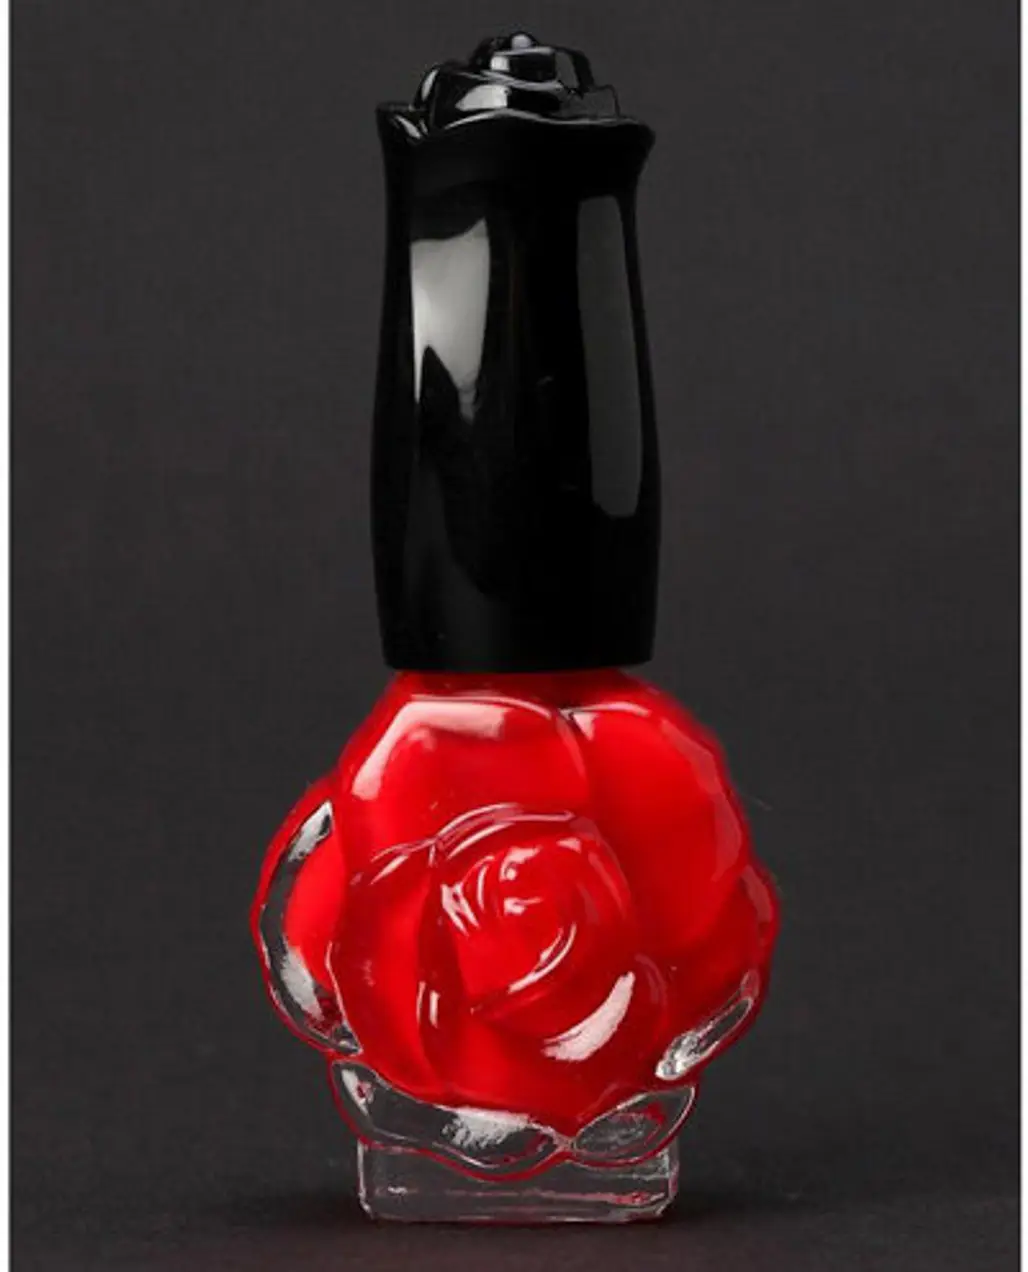 Anna Sui Enamel Nail Polish in Red